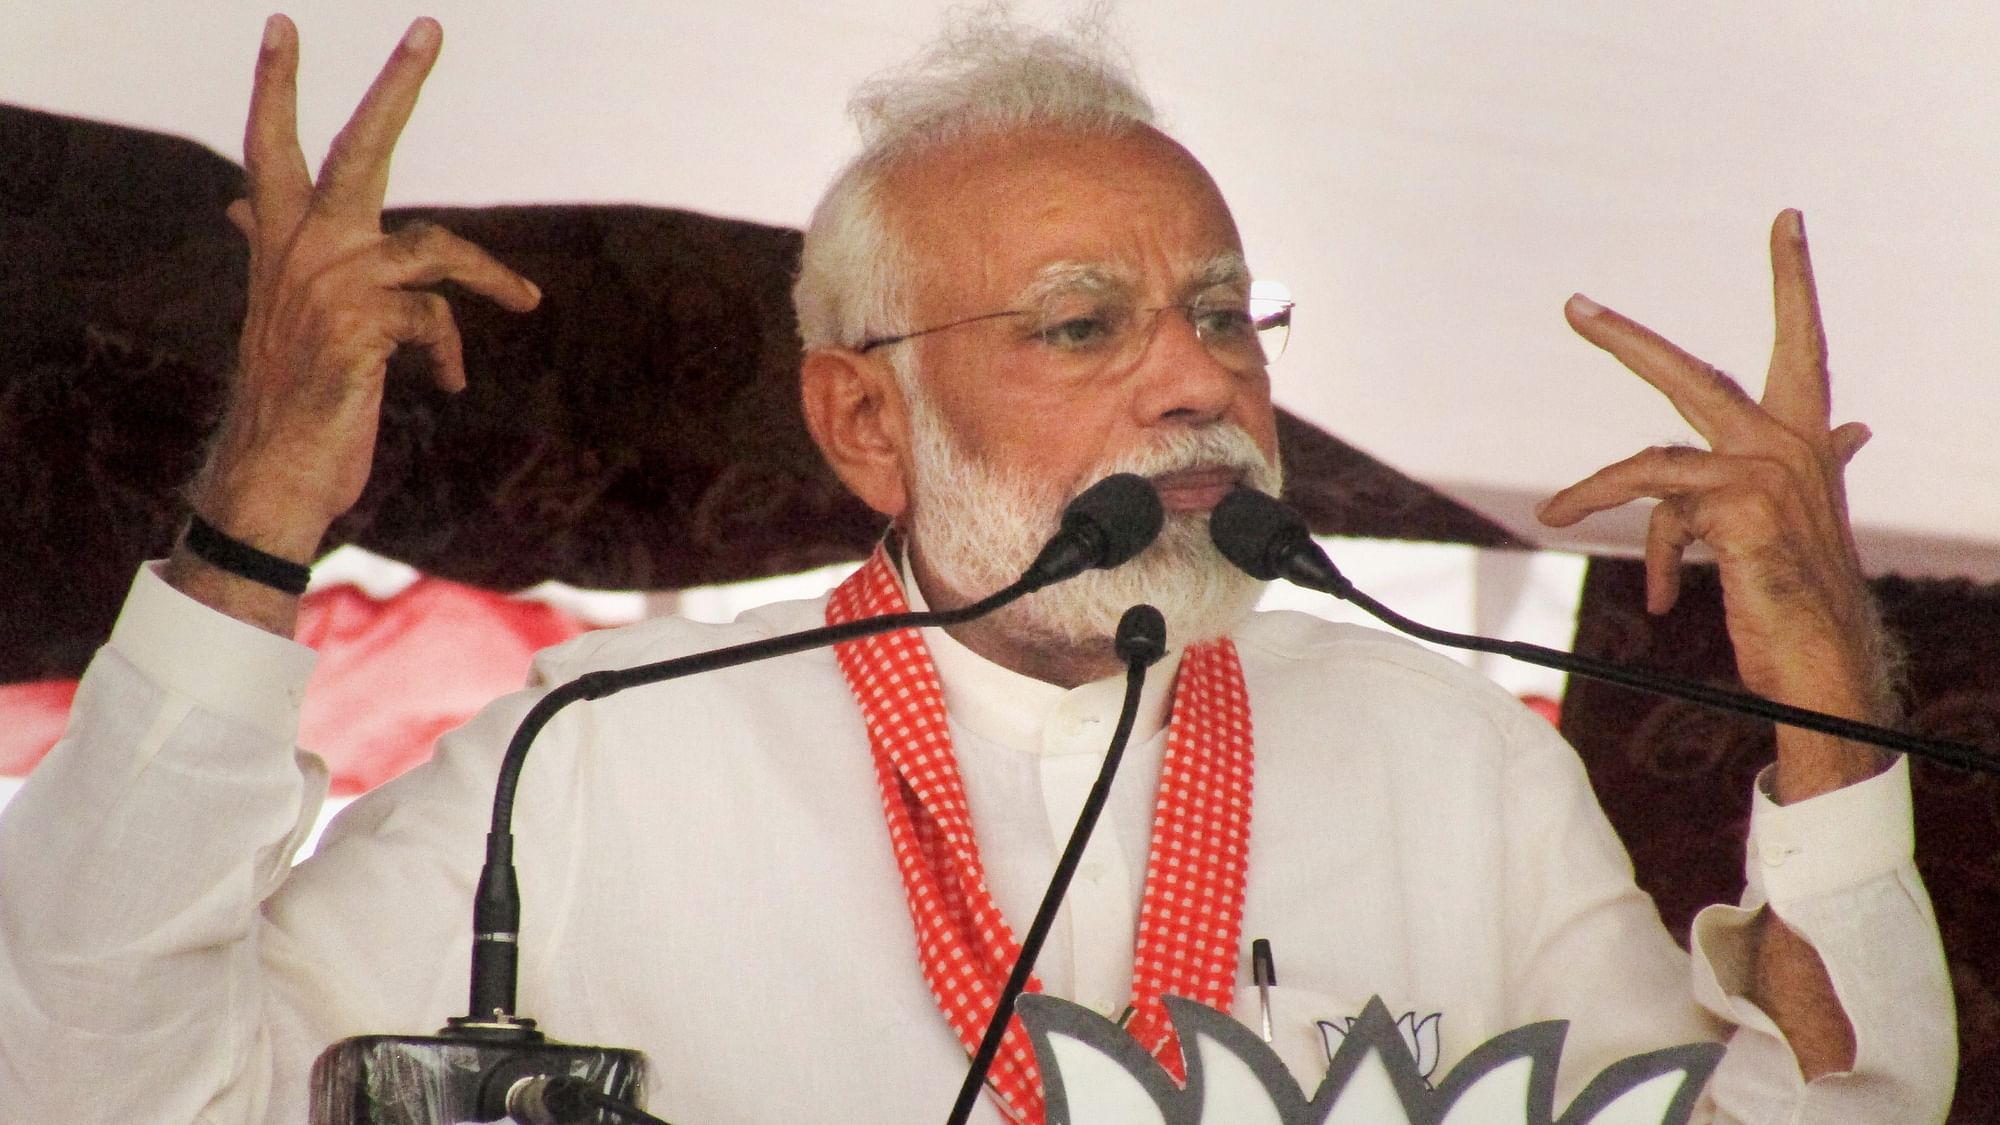 PM Modi addressed an election rally at UP’s Sonebhadra just a day before the sixth phase of the ongoing polls again.